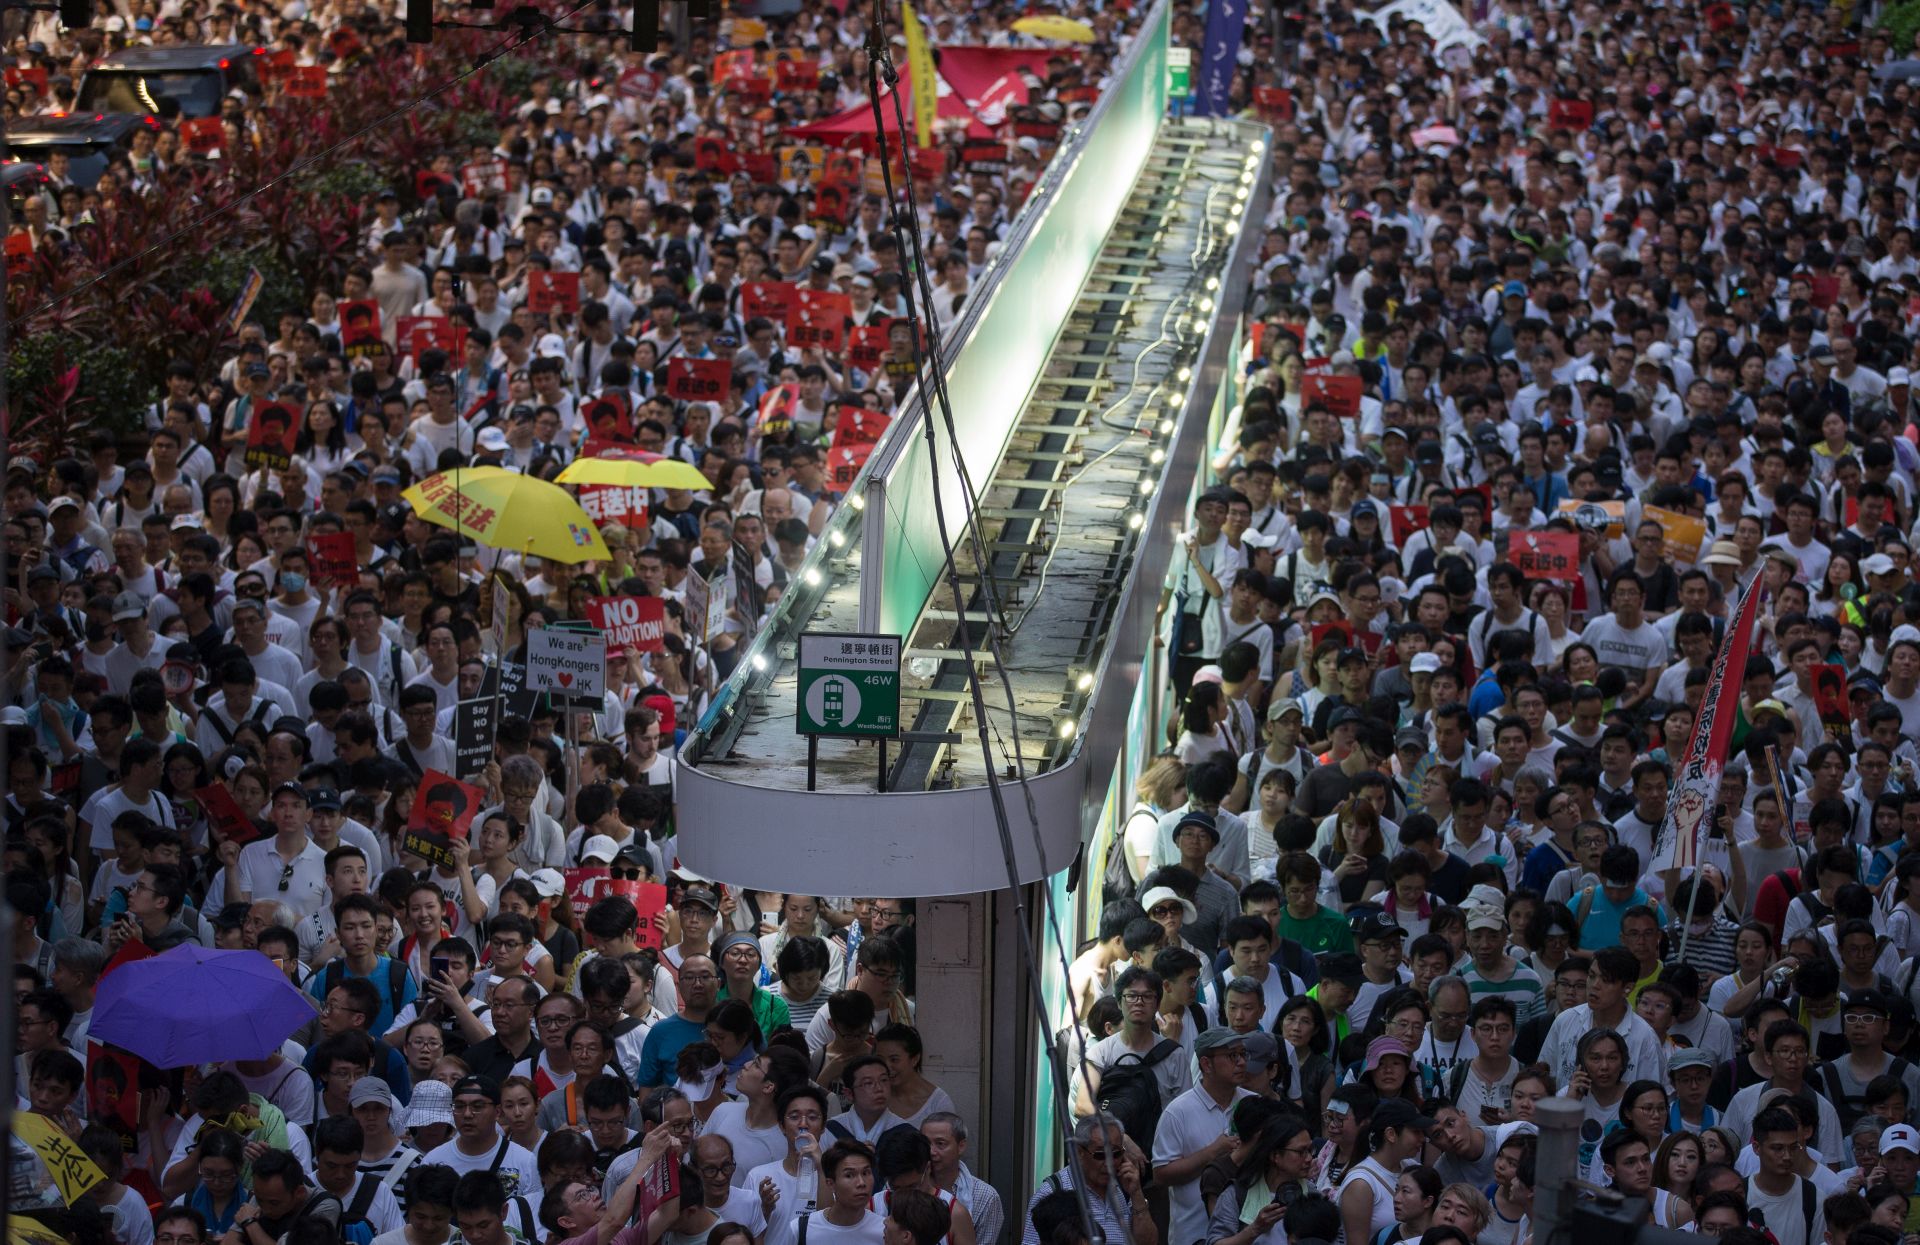 epa07636697 Thousands of protesters take part in a march against amendments to an extradition bill in Hong Kong, China, 09 June 2019. The bill, which has faced immense opposition from pan-democrats, the business sector and the international community, would allow the transfer of fugitives to jurisdictions which Hong Kong does not have a treaty with, including mainland China. Critics of the bill have expressed concern over unfair trials and a lack of human rights protection in mainland China.  EPA/JEROME FAVRE